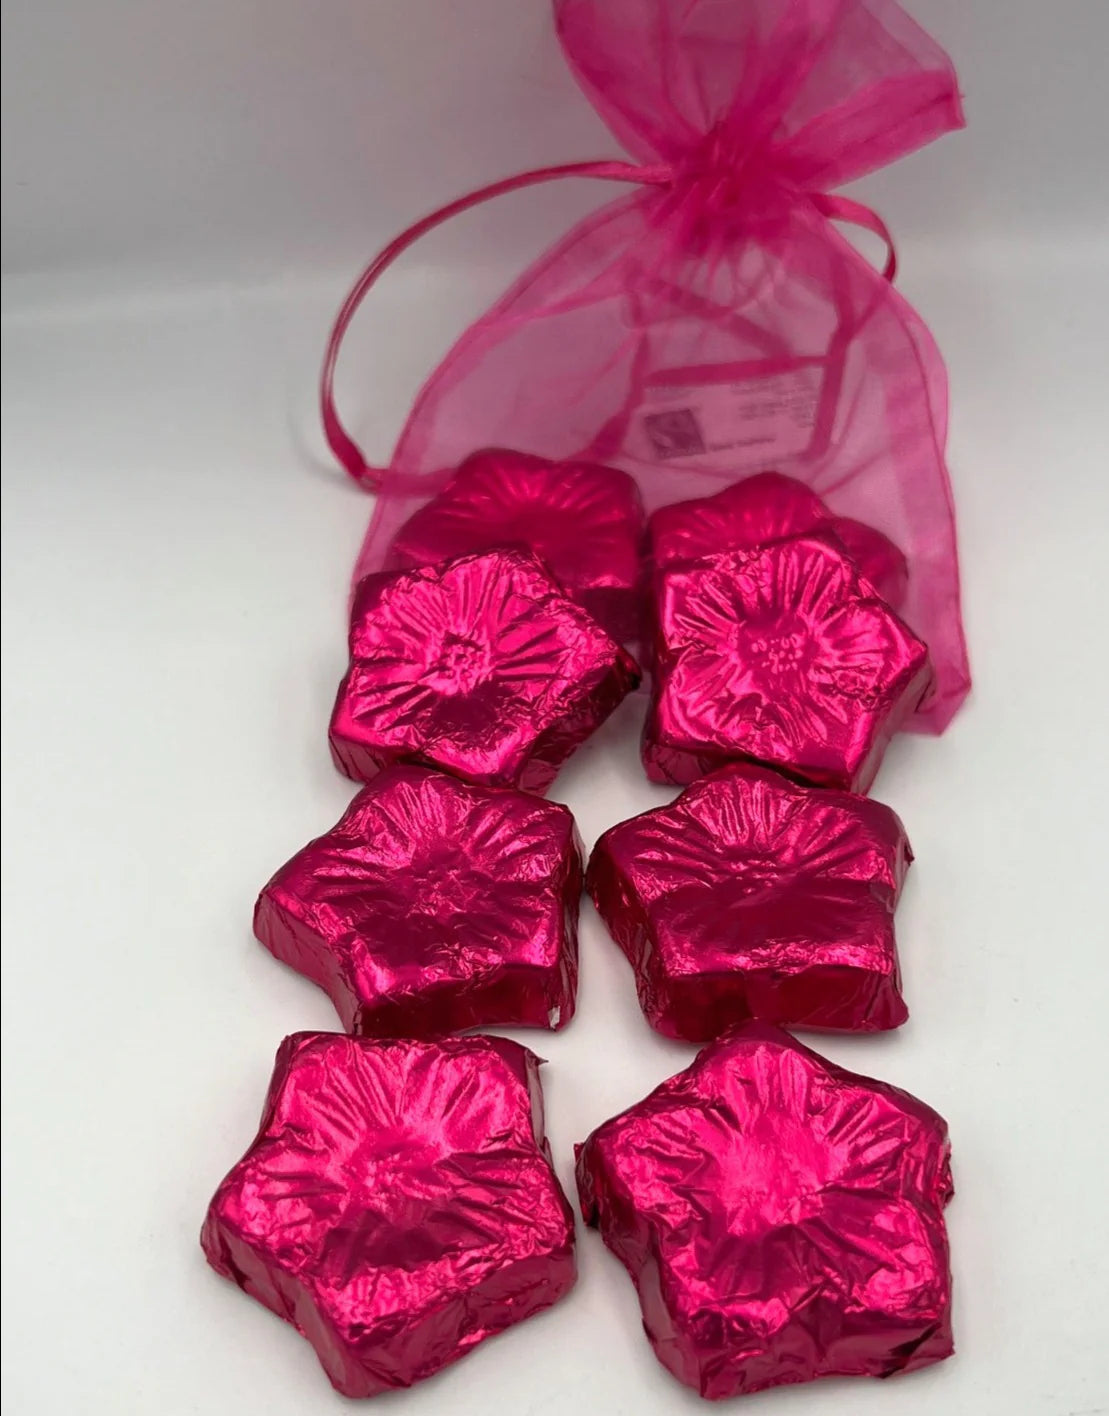 Pouch of Foil Wrapped Chocolate Flowers